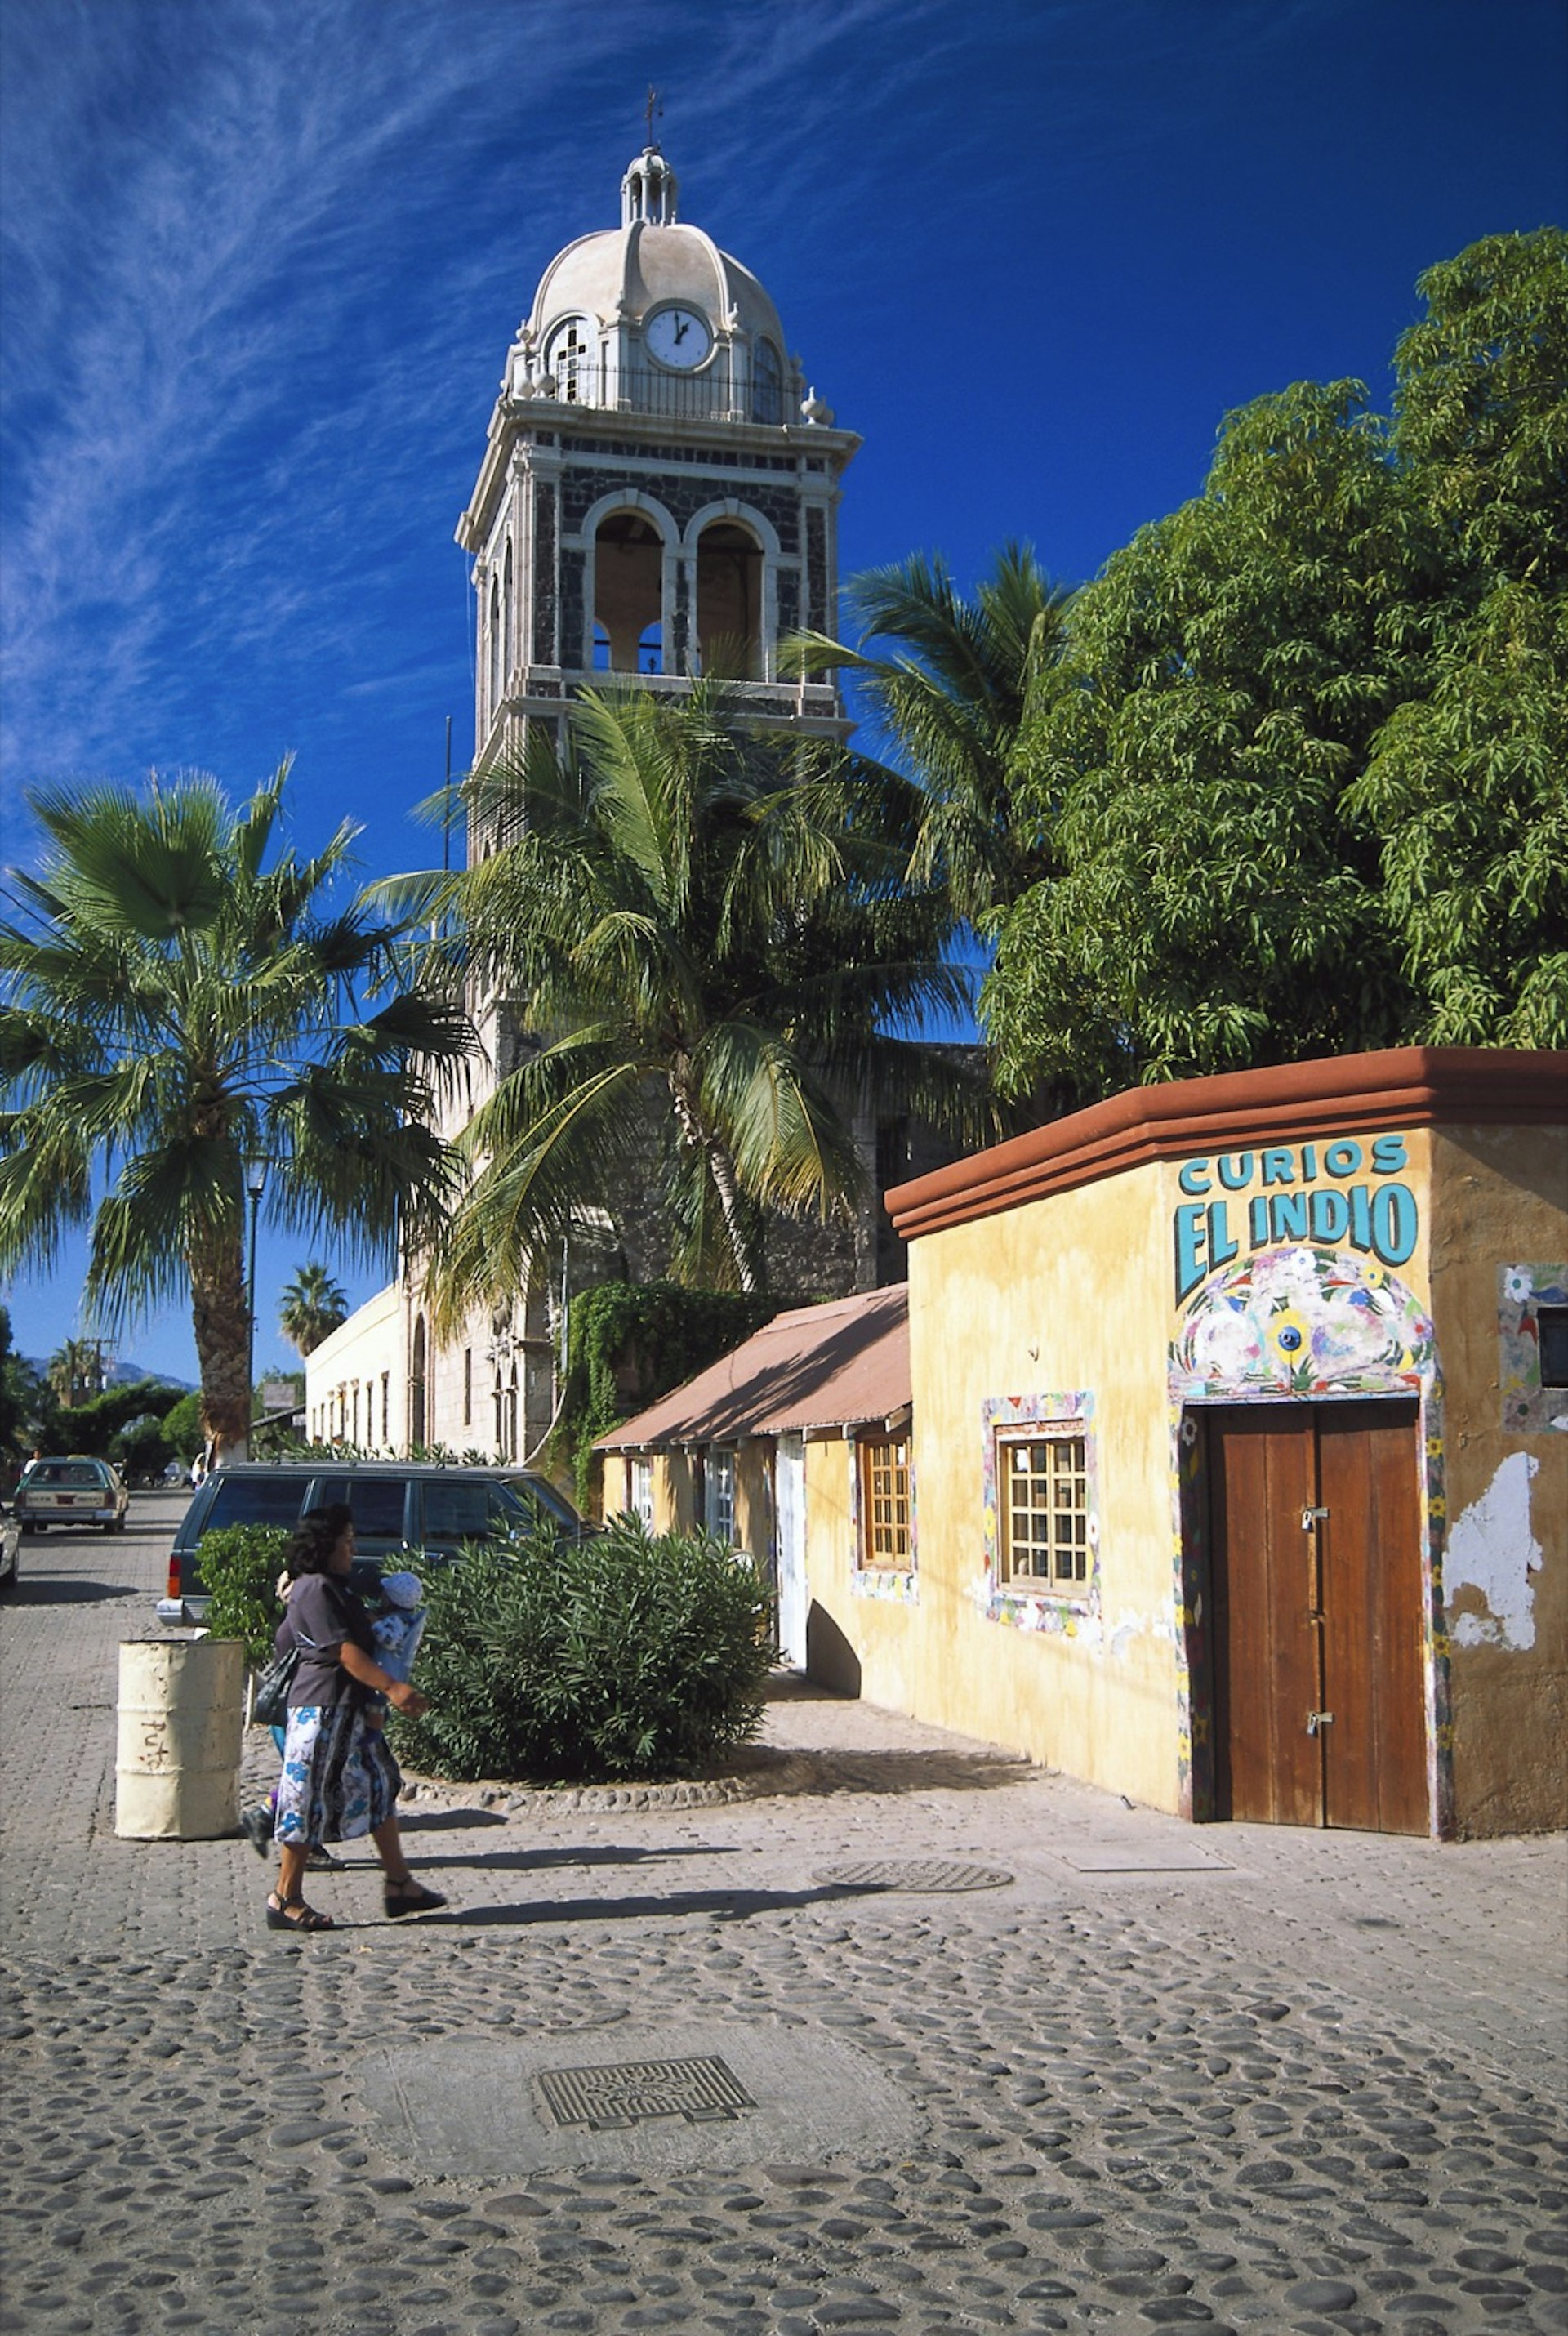 A woman crosses a cobble stone street with a church and palm trees in the background